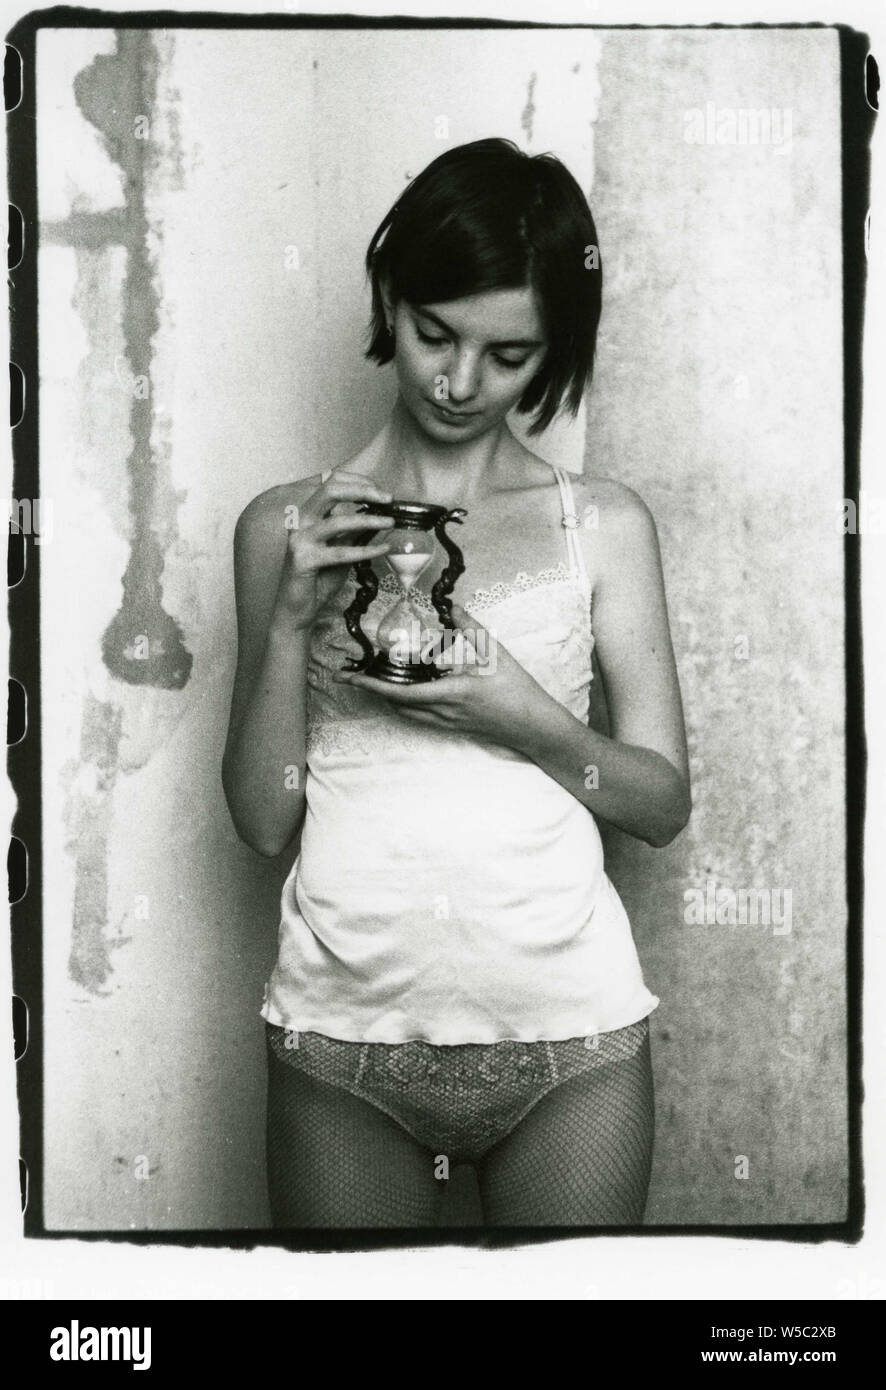 https://c8.alamy.com/comp/W5C2XB/girl-in-panties-pantyhose-and-nightgown-holding-an-hourglass-attention!-image-contains-grit-and-other-analog-photography-artifacts!-W5C2XB.jpg